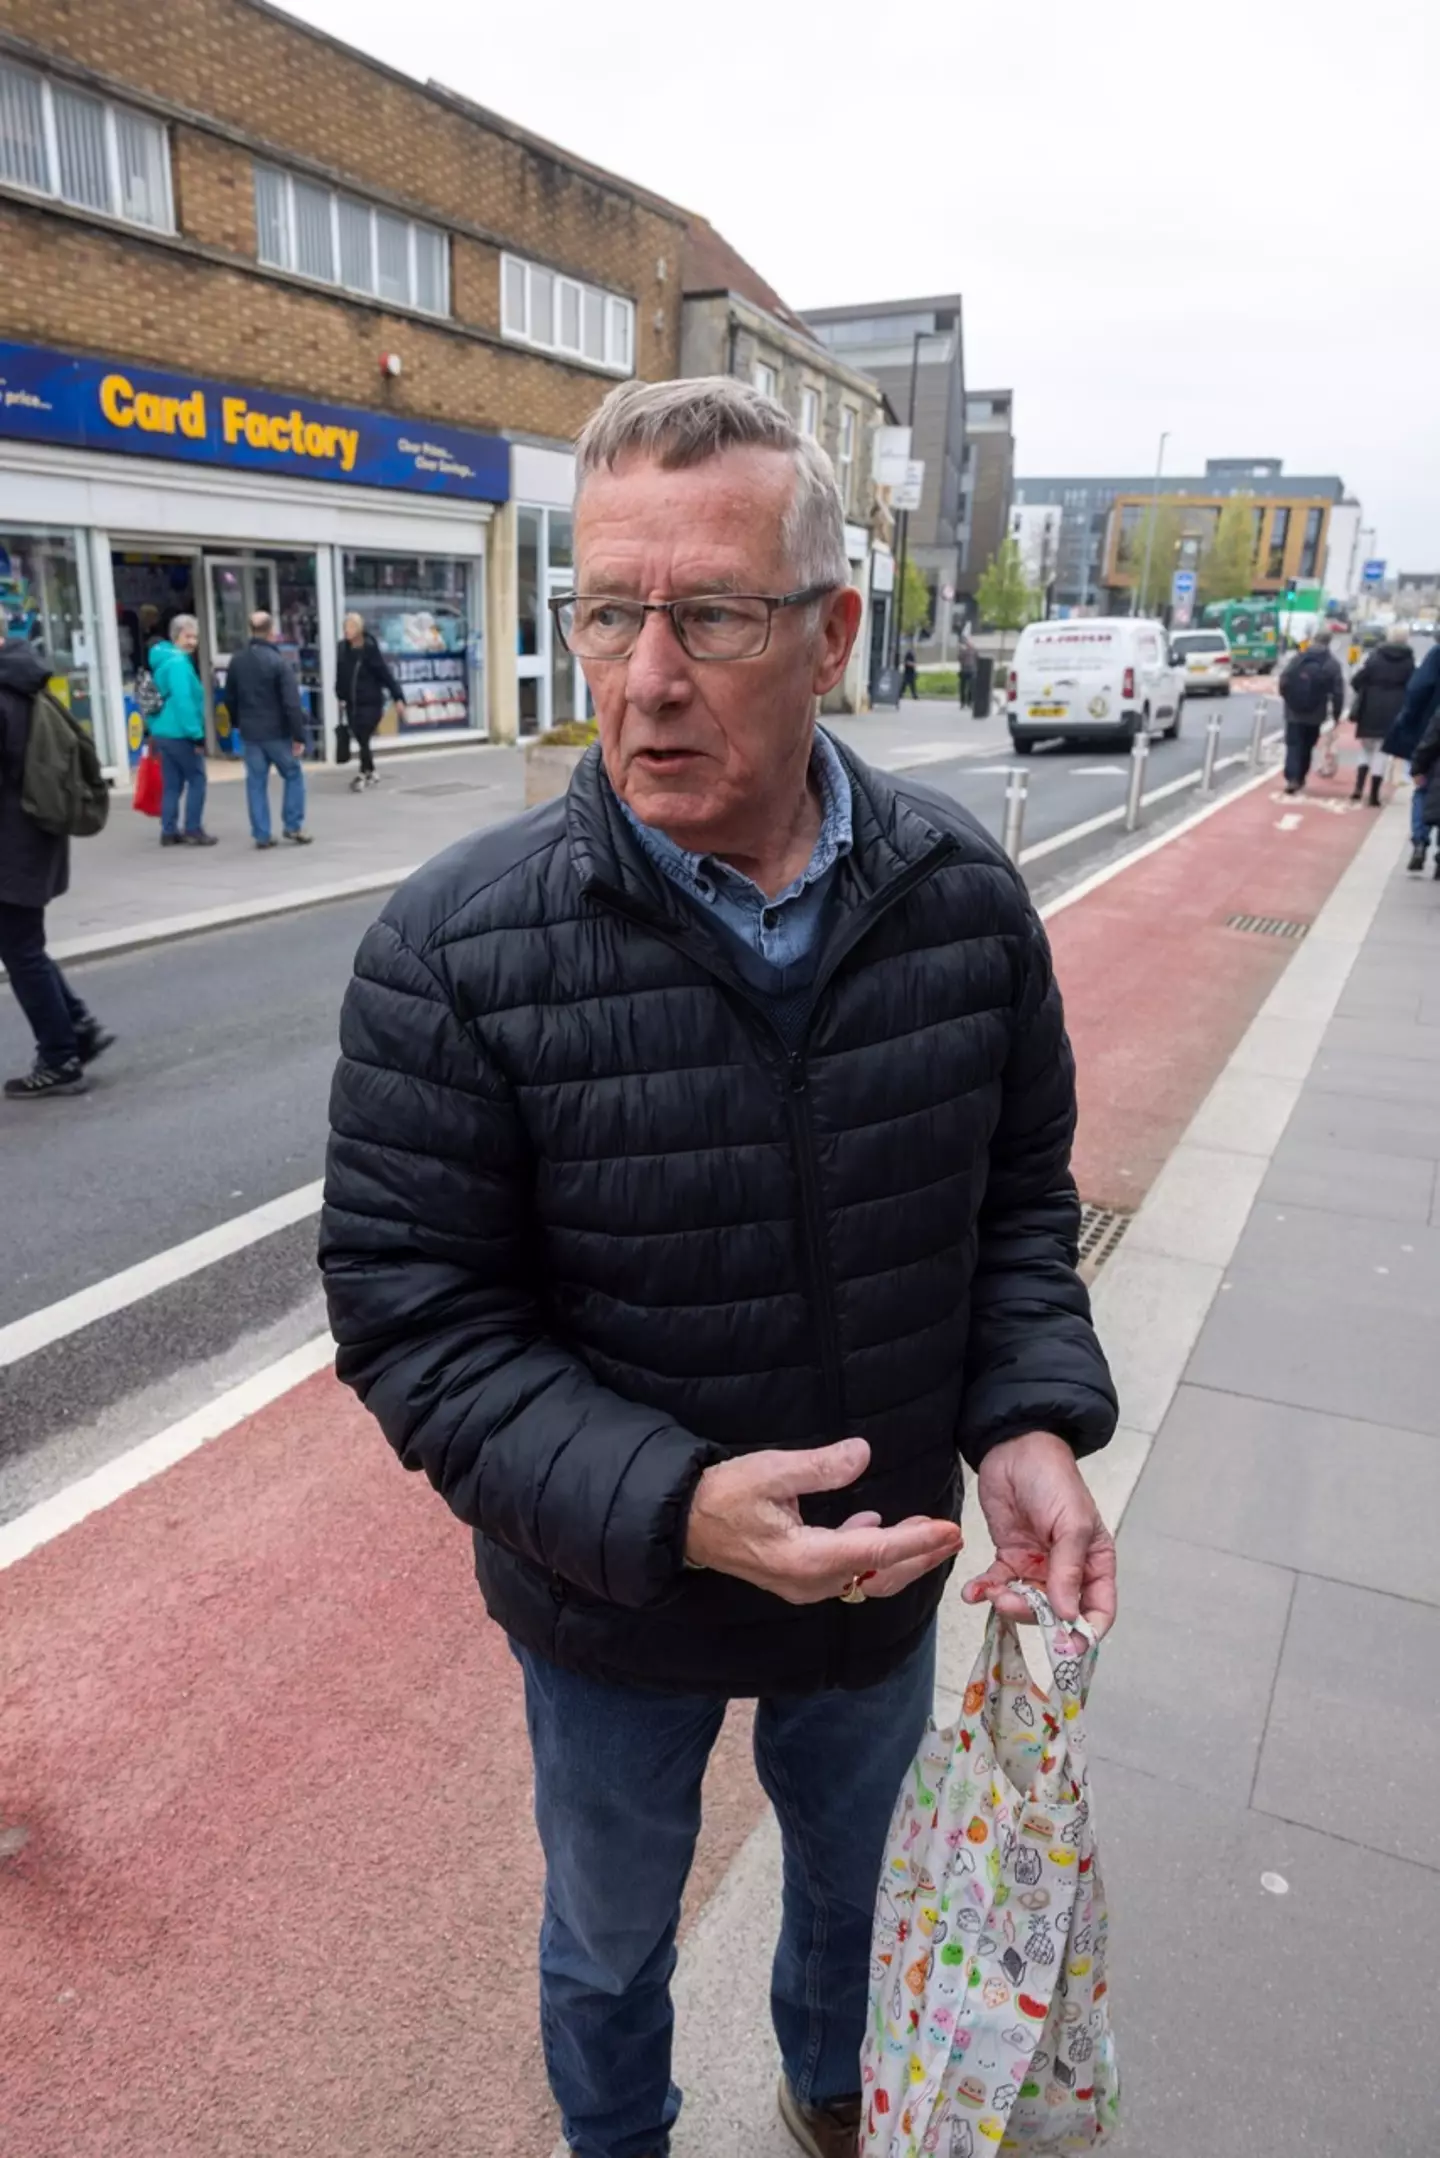 Dave Dawson is one of the 59 people that have been injured on Keynsham High Street, after a new cycle lane was installed last March 2022.